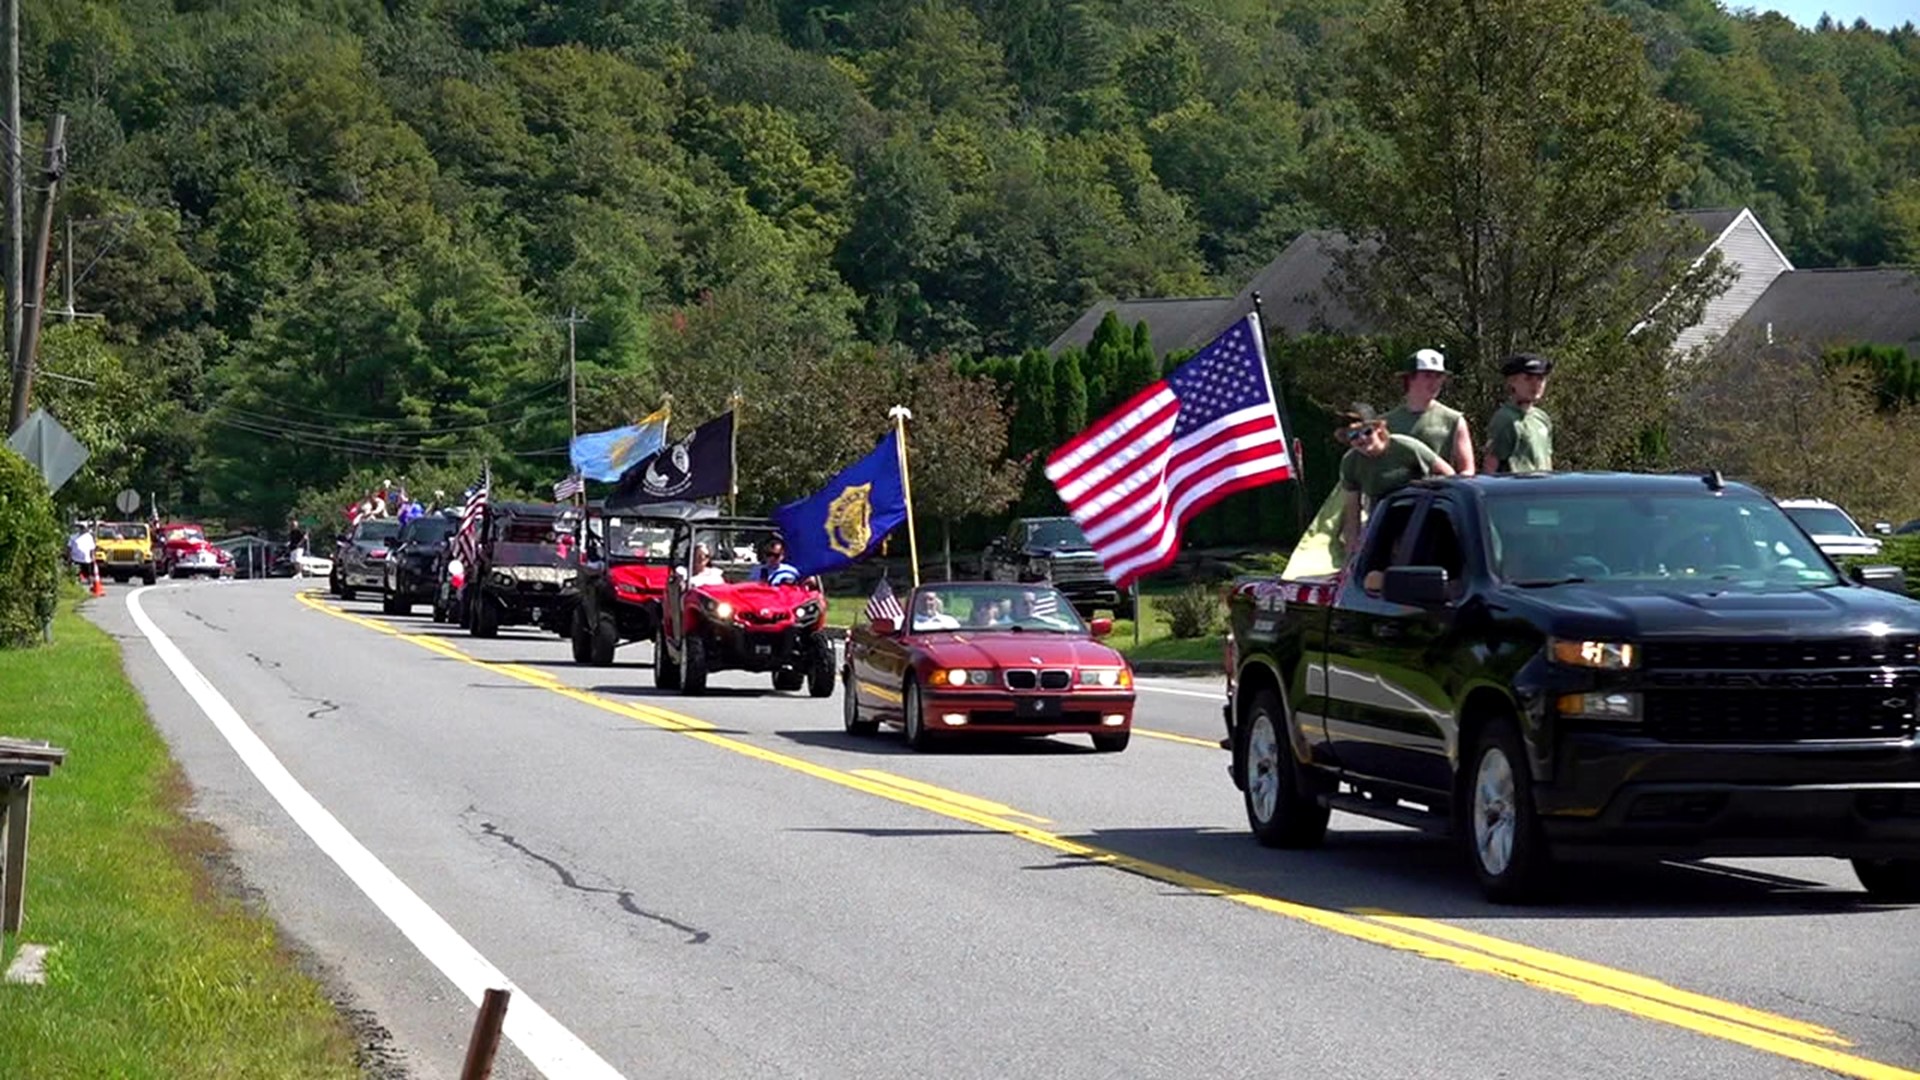 After a few postponements, a parade finally got the chance to step off in Luzerne County.